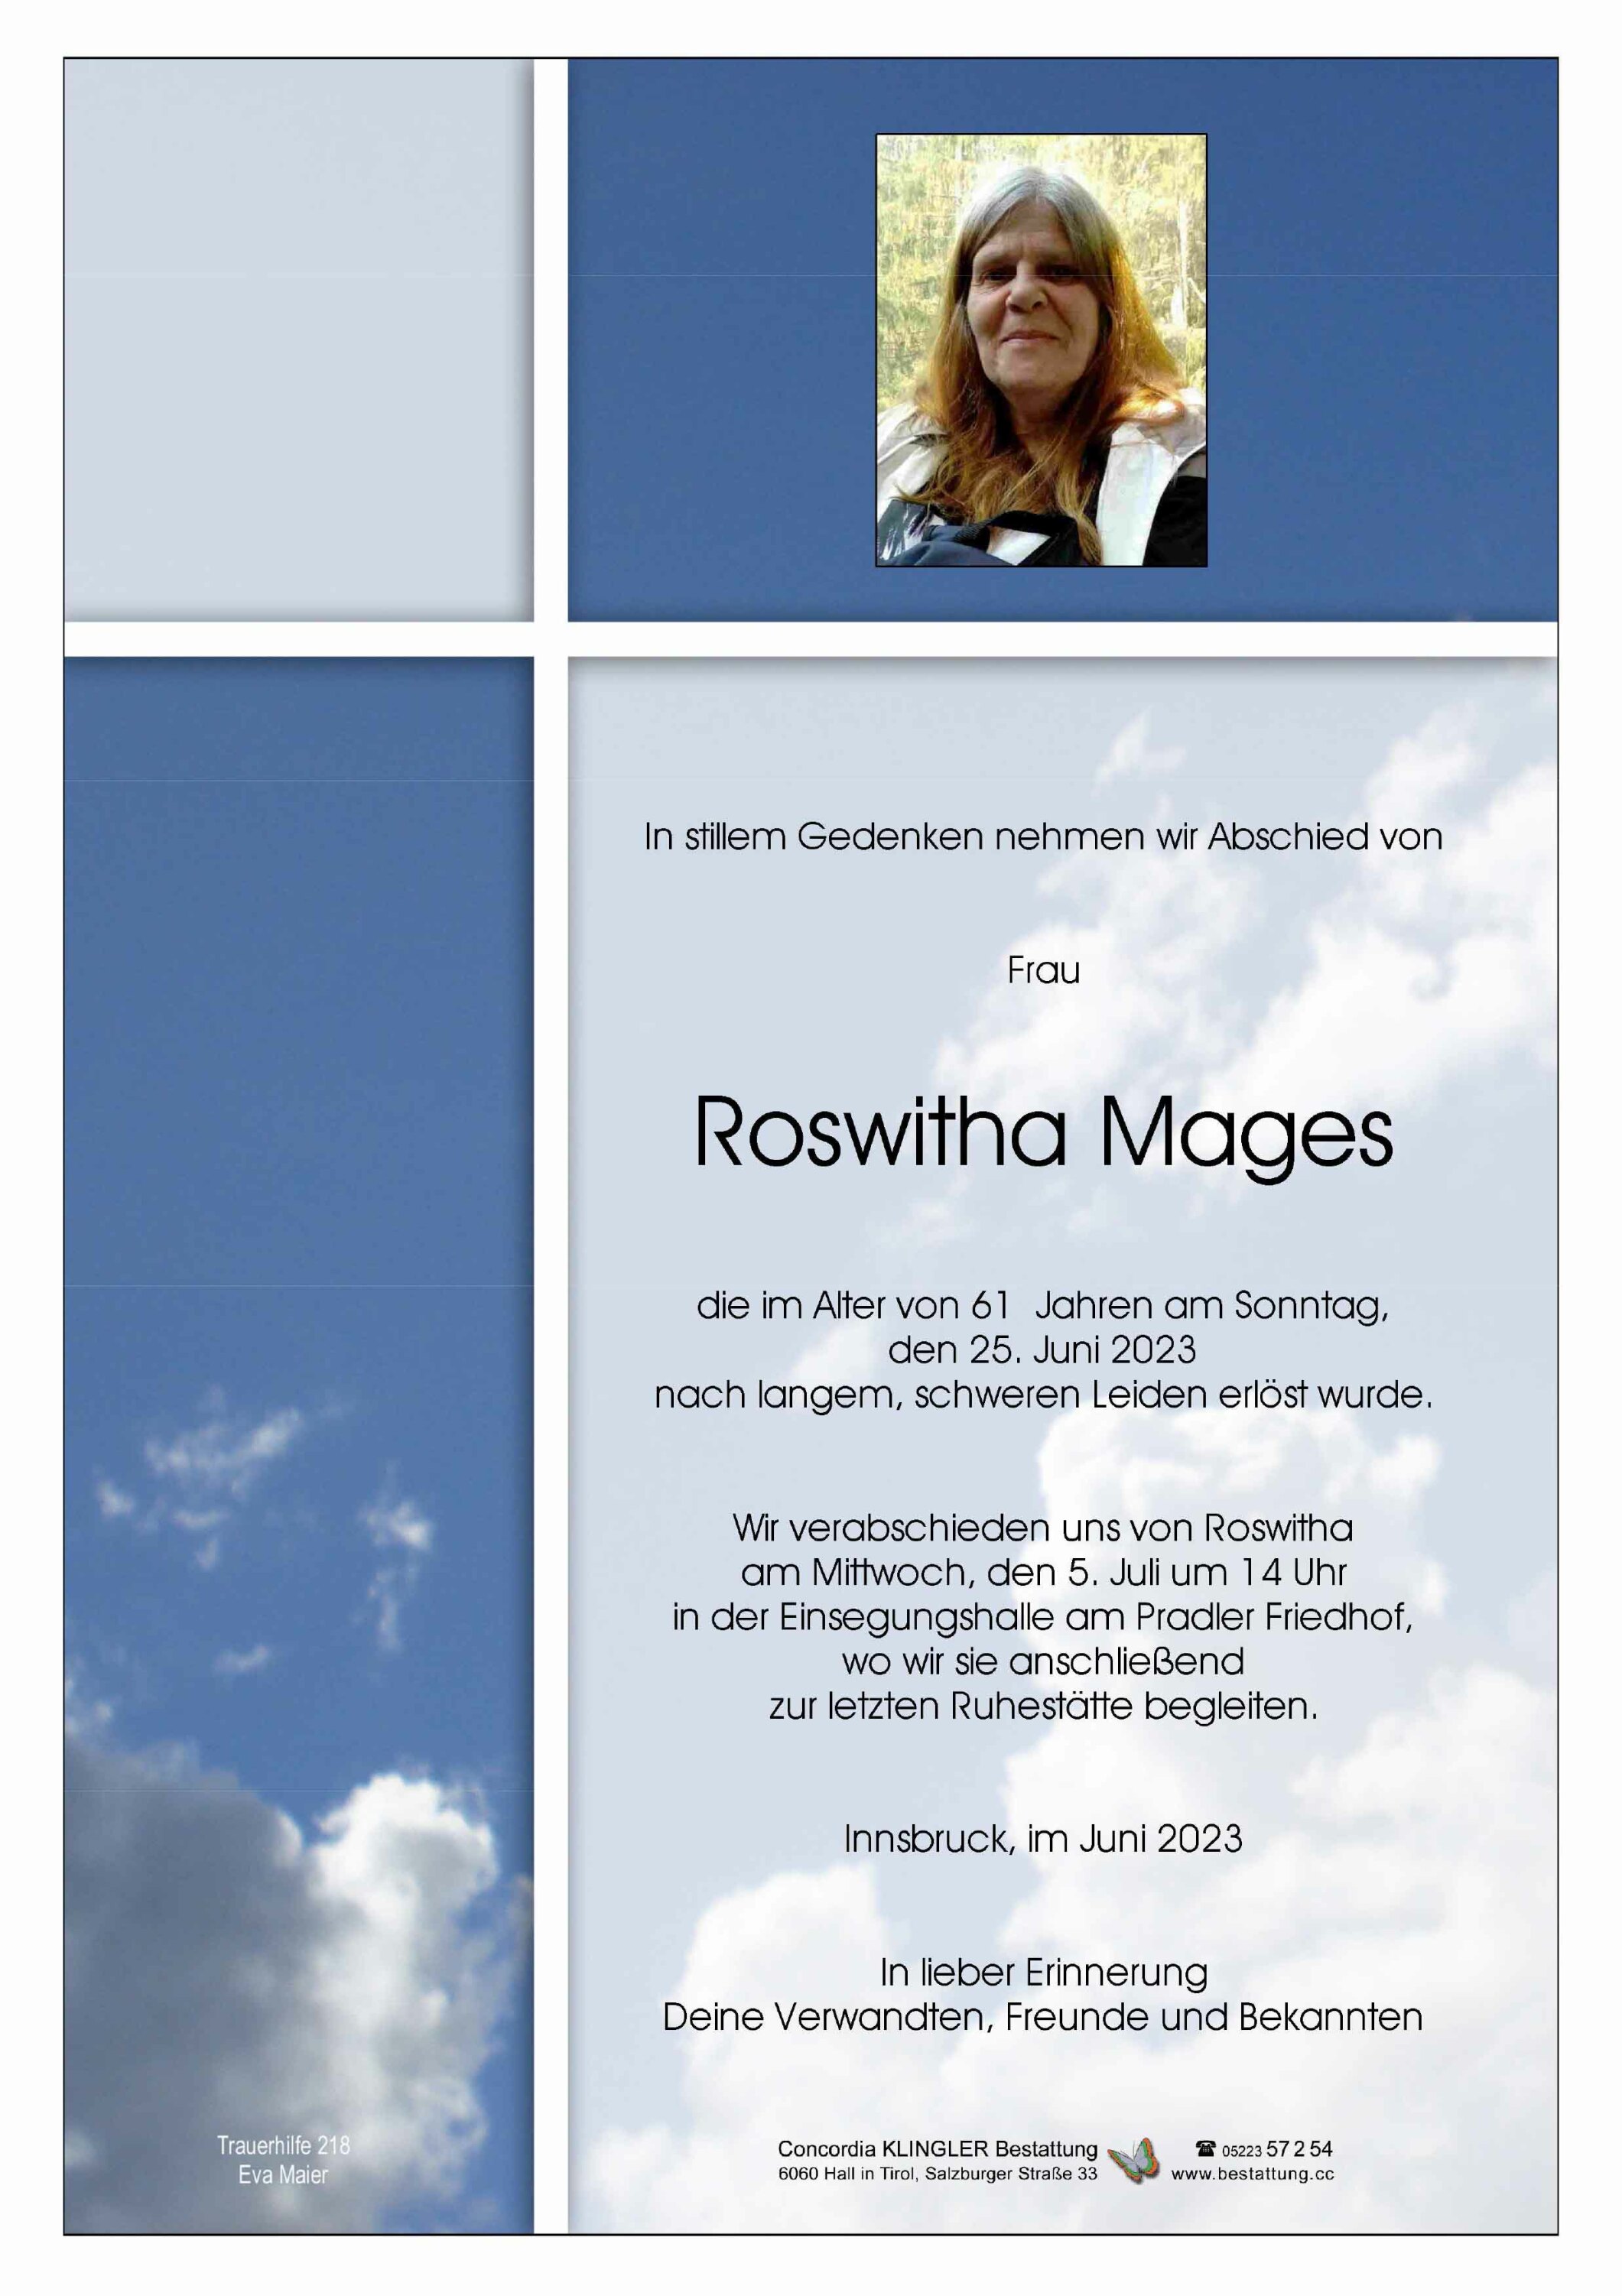 Roswitha Mages